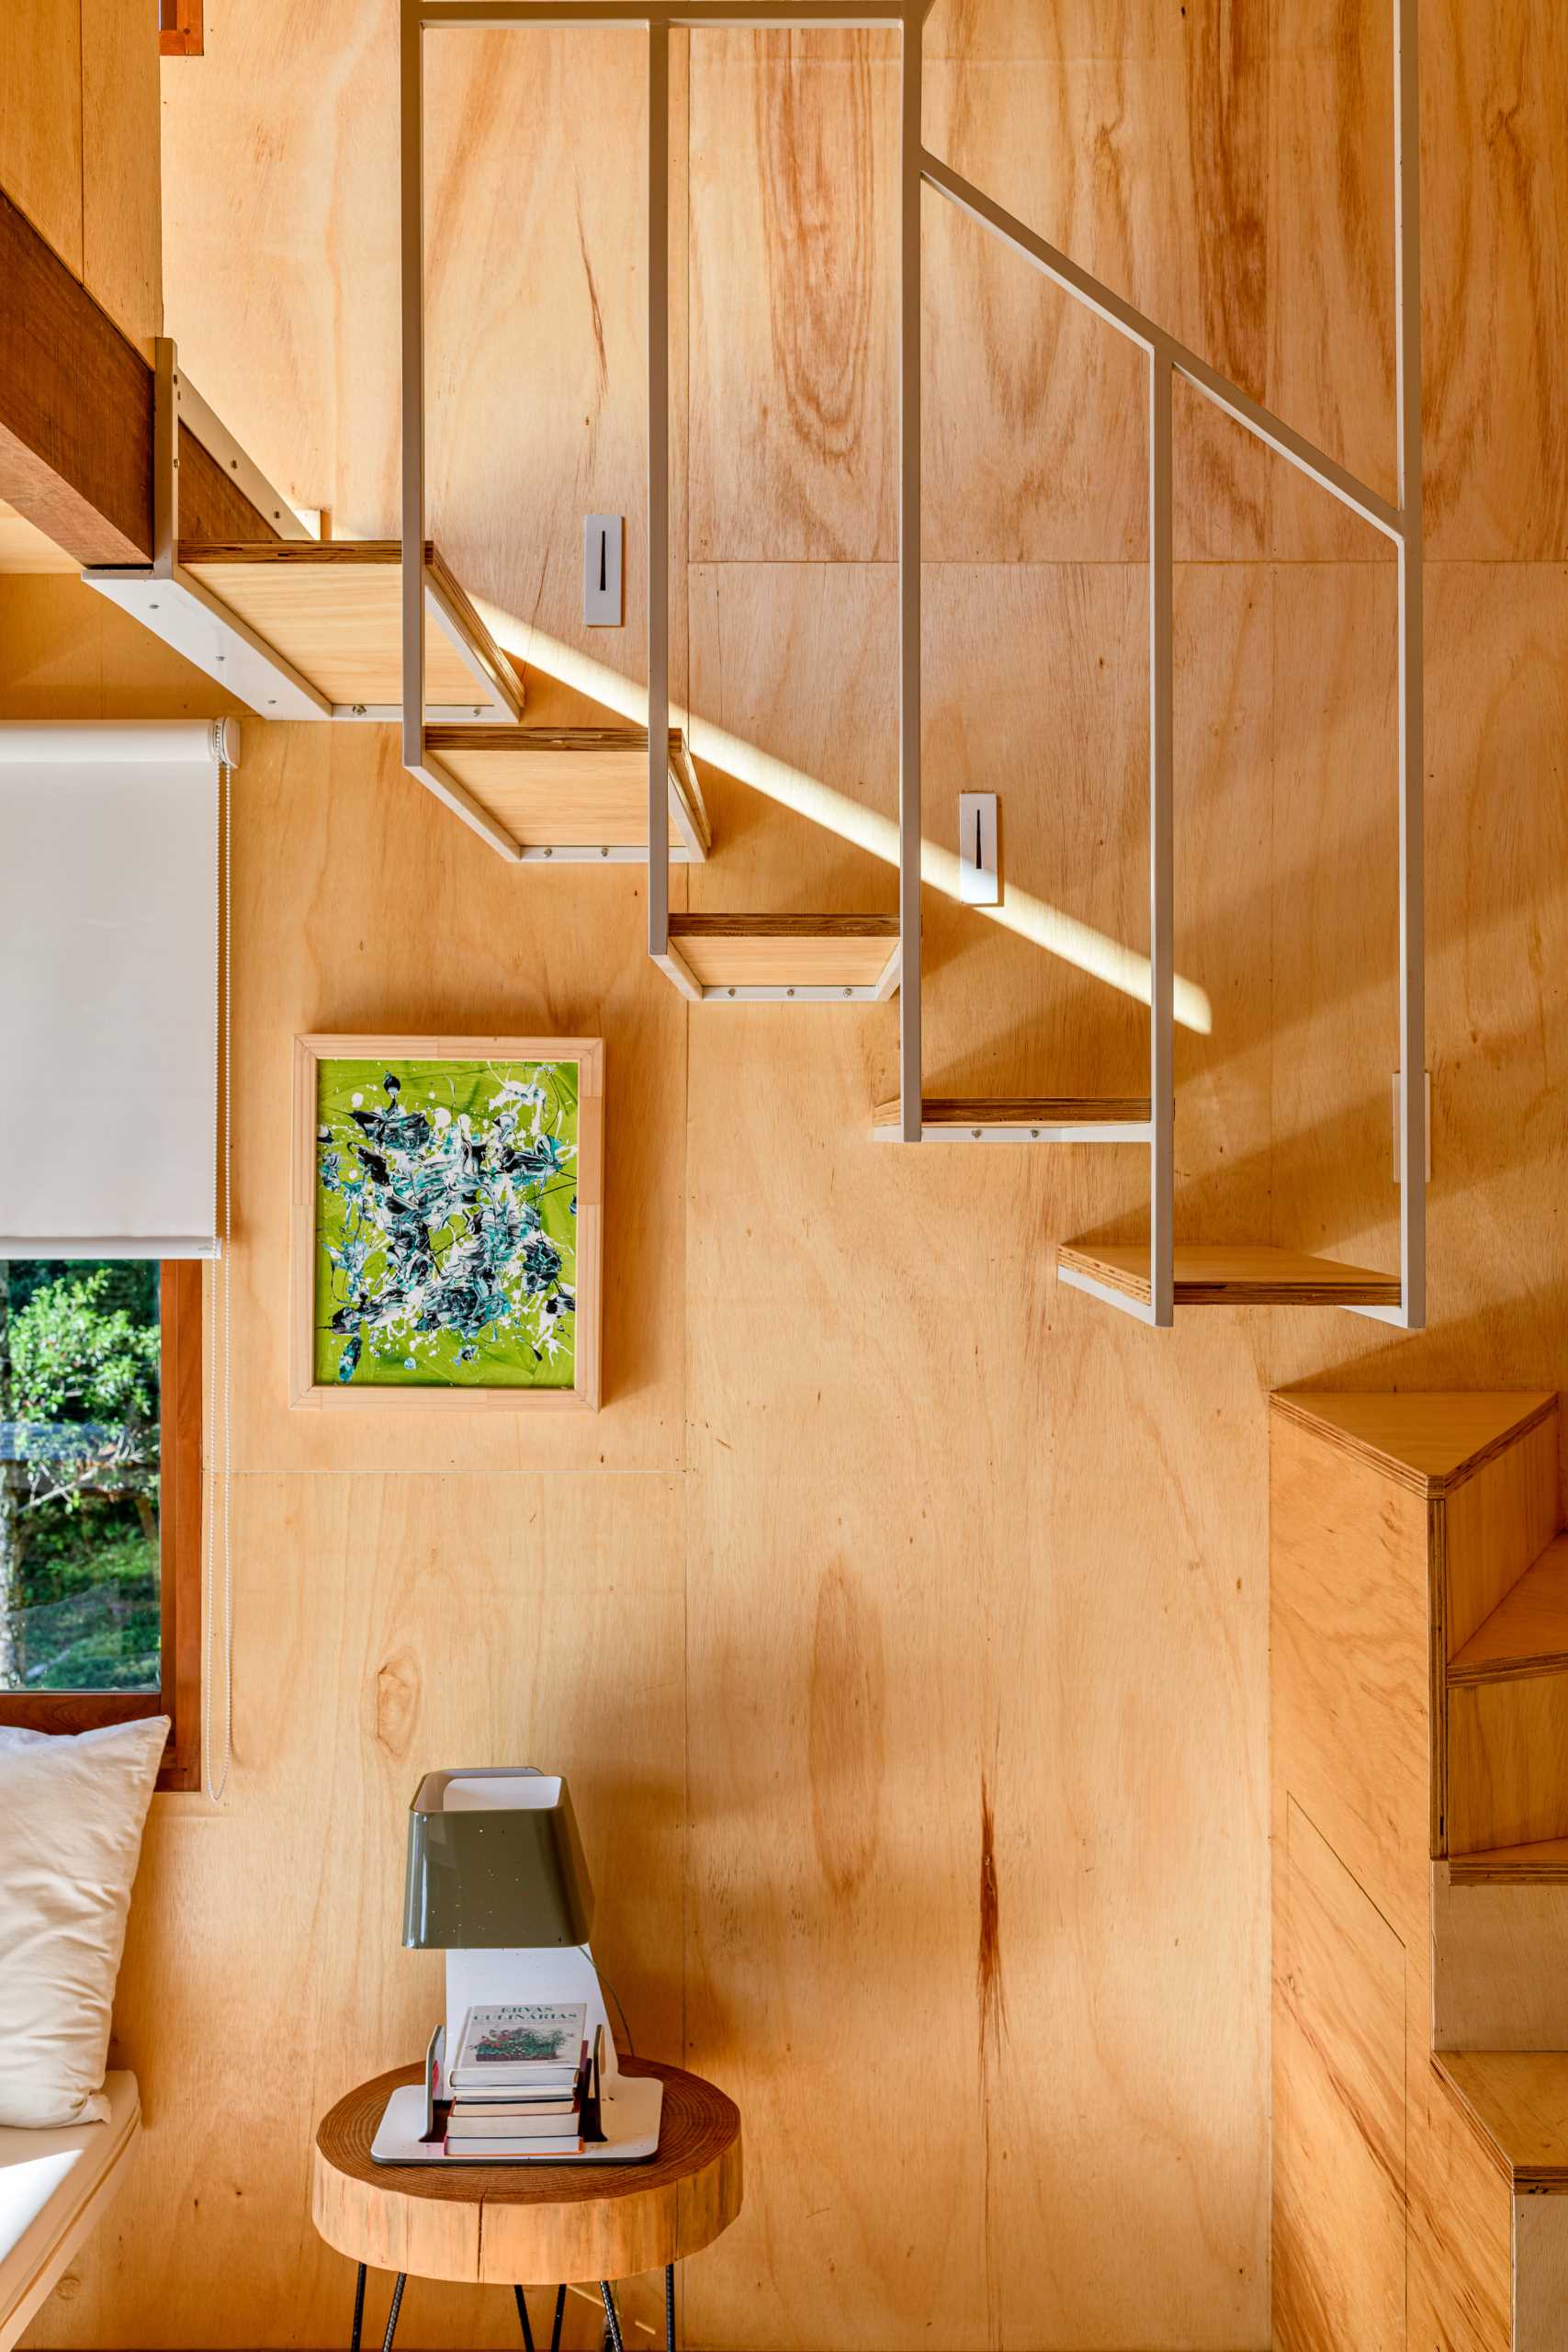 Wood and metal stairs inside a modern tree house with a mezzanine bedroom.